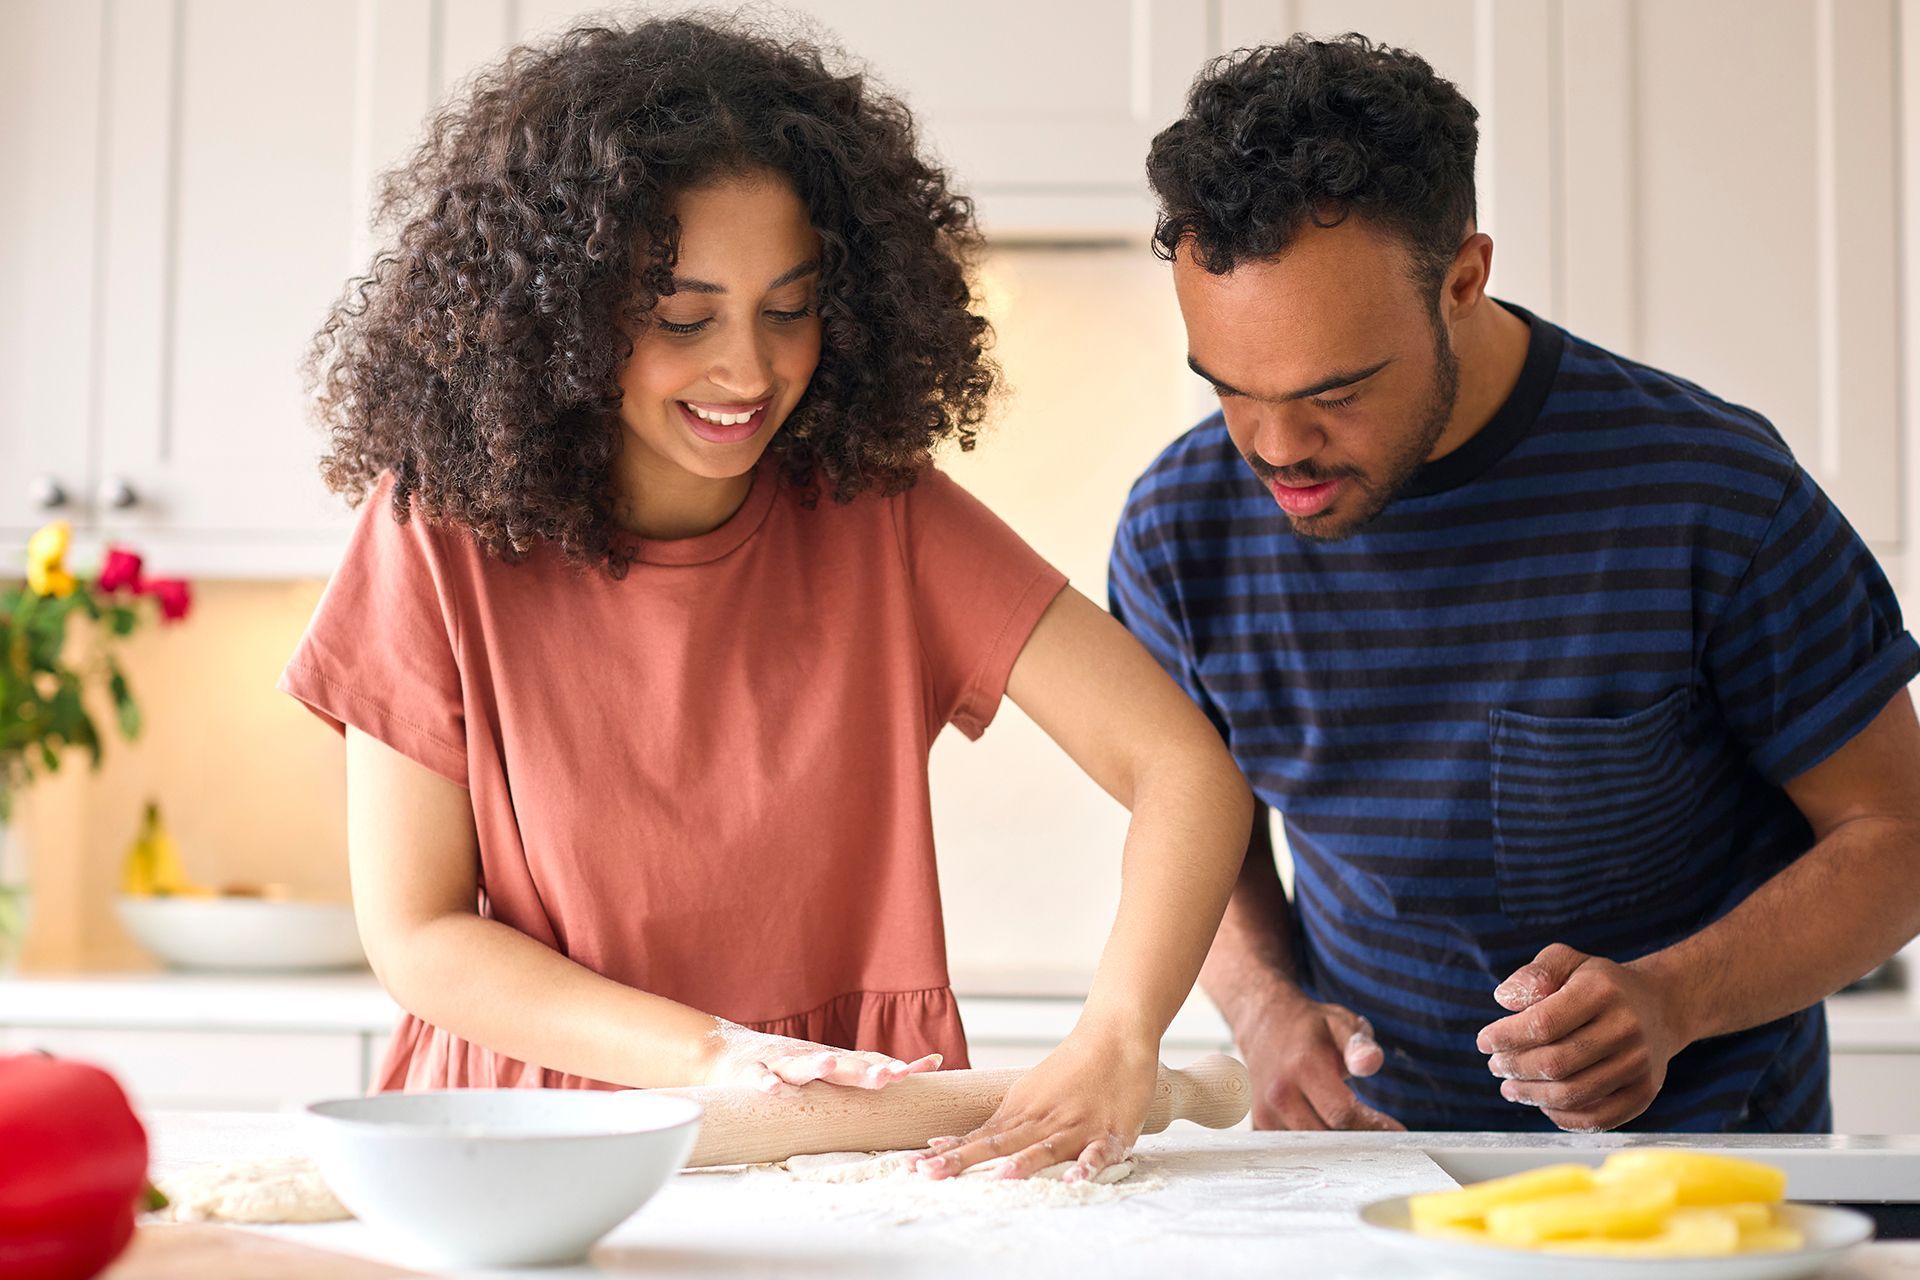 a man and a woman are rolling dough together in a kitchen